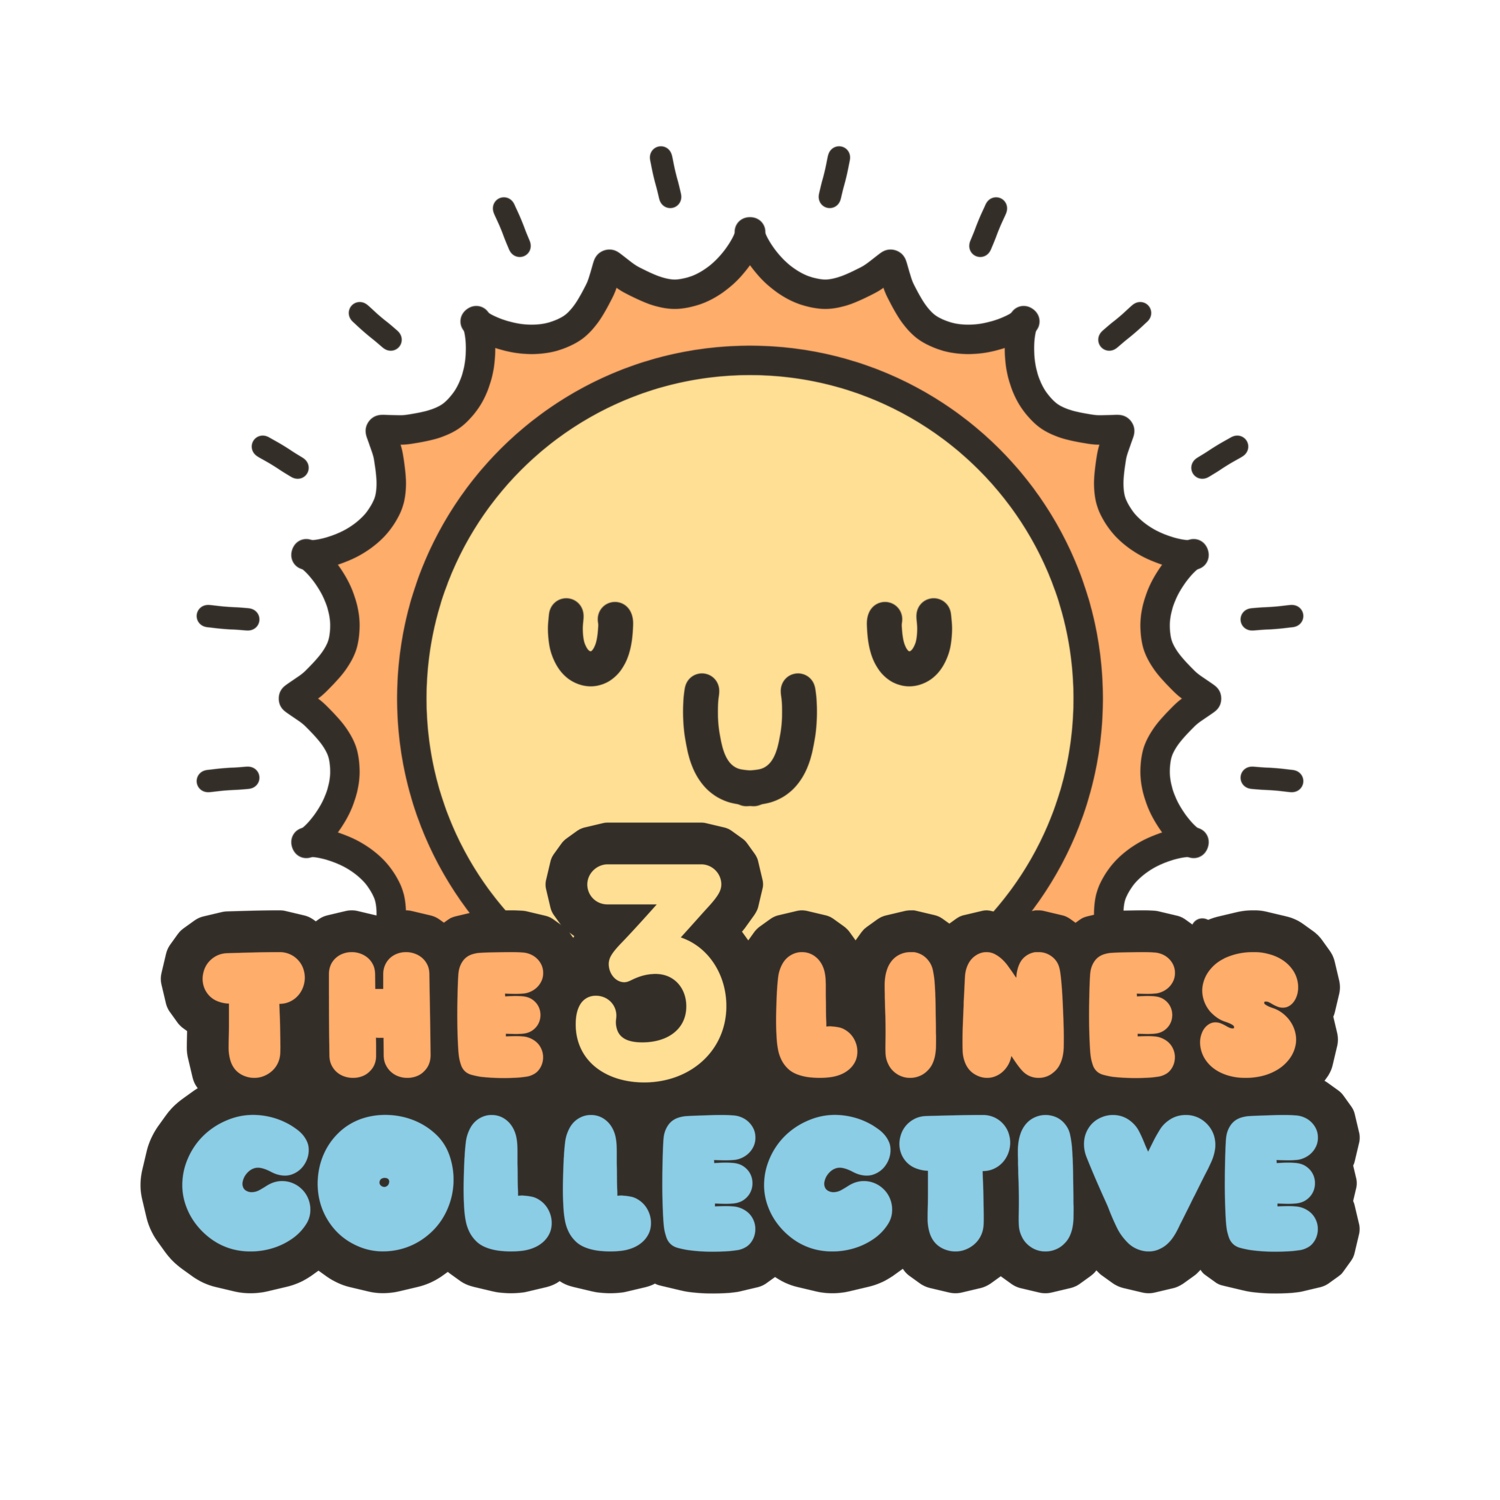 The 3 Lines Collective